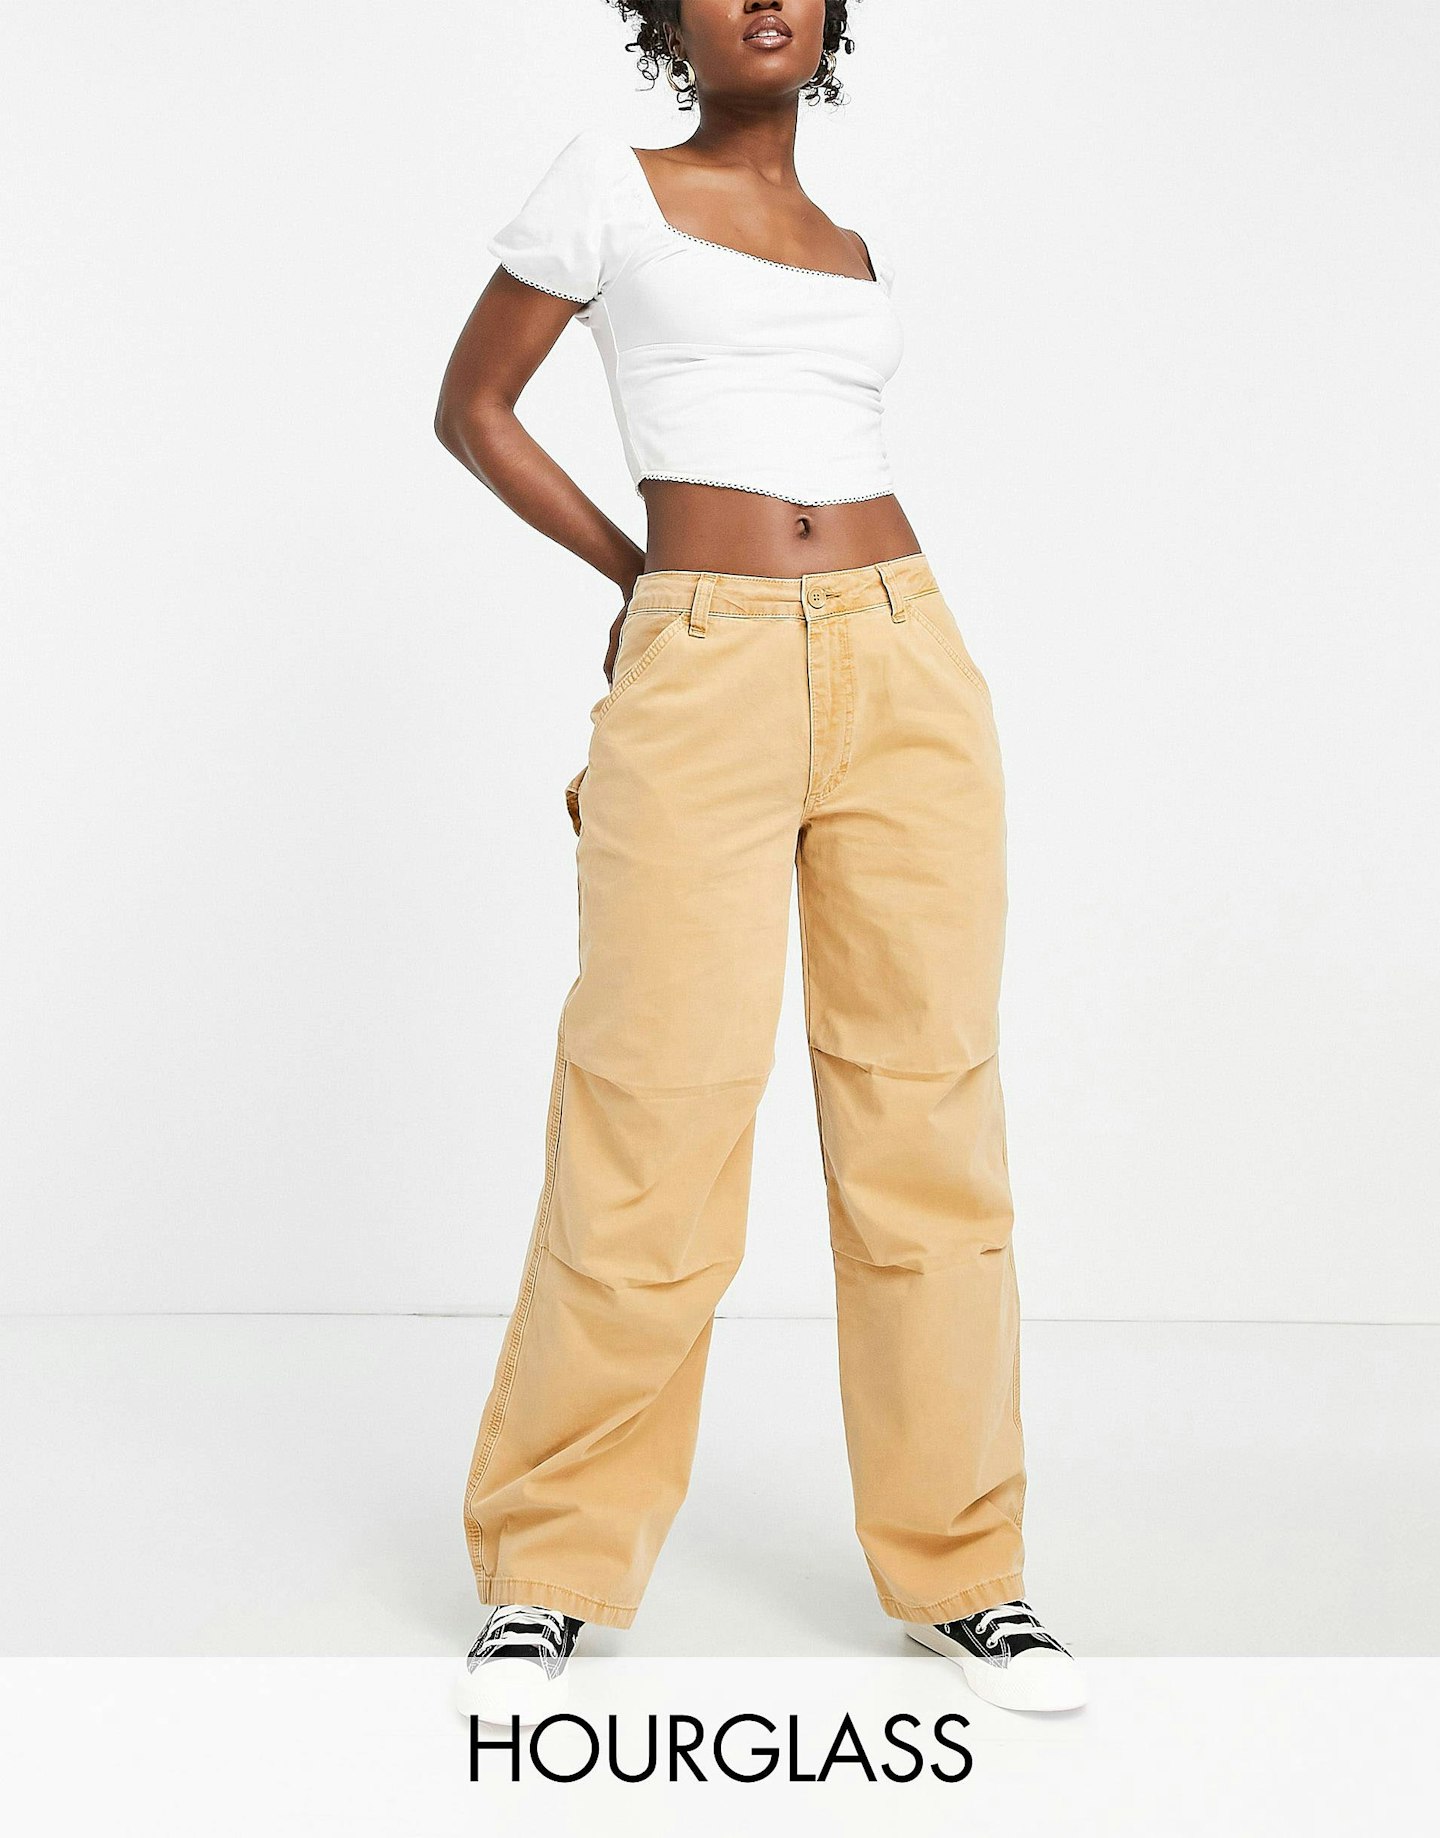 ASOS Design, Hourglass Slouchy Cargo Trousers